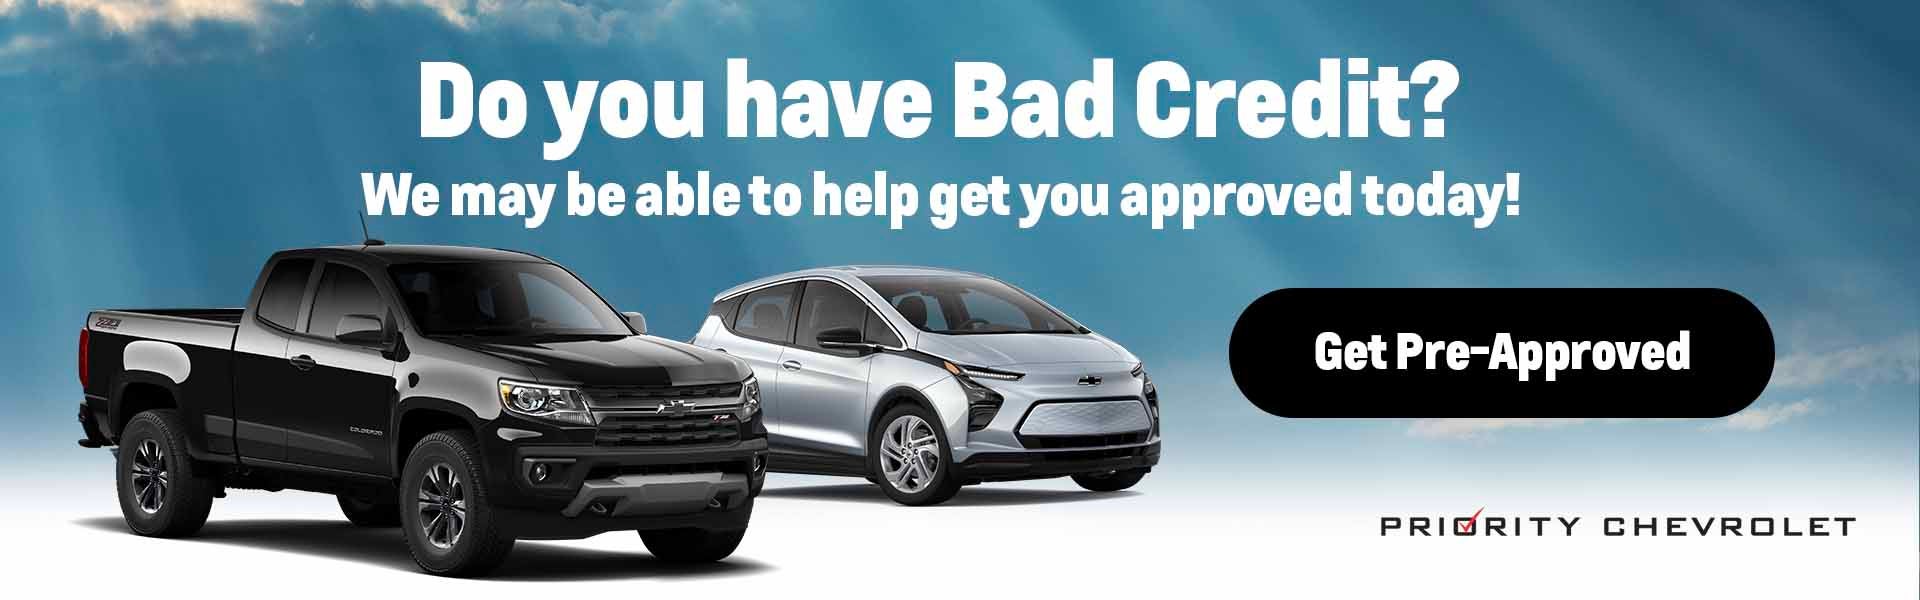 Have Less than Perfect Credit? We might be able to help you get approved right away!